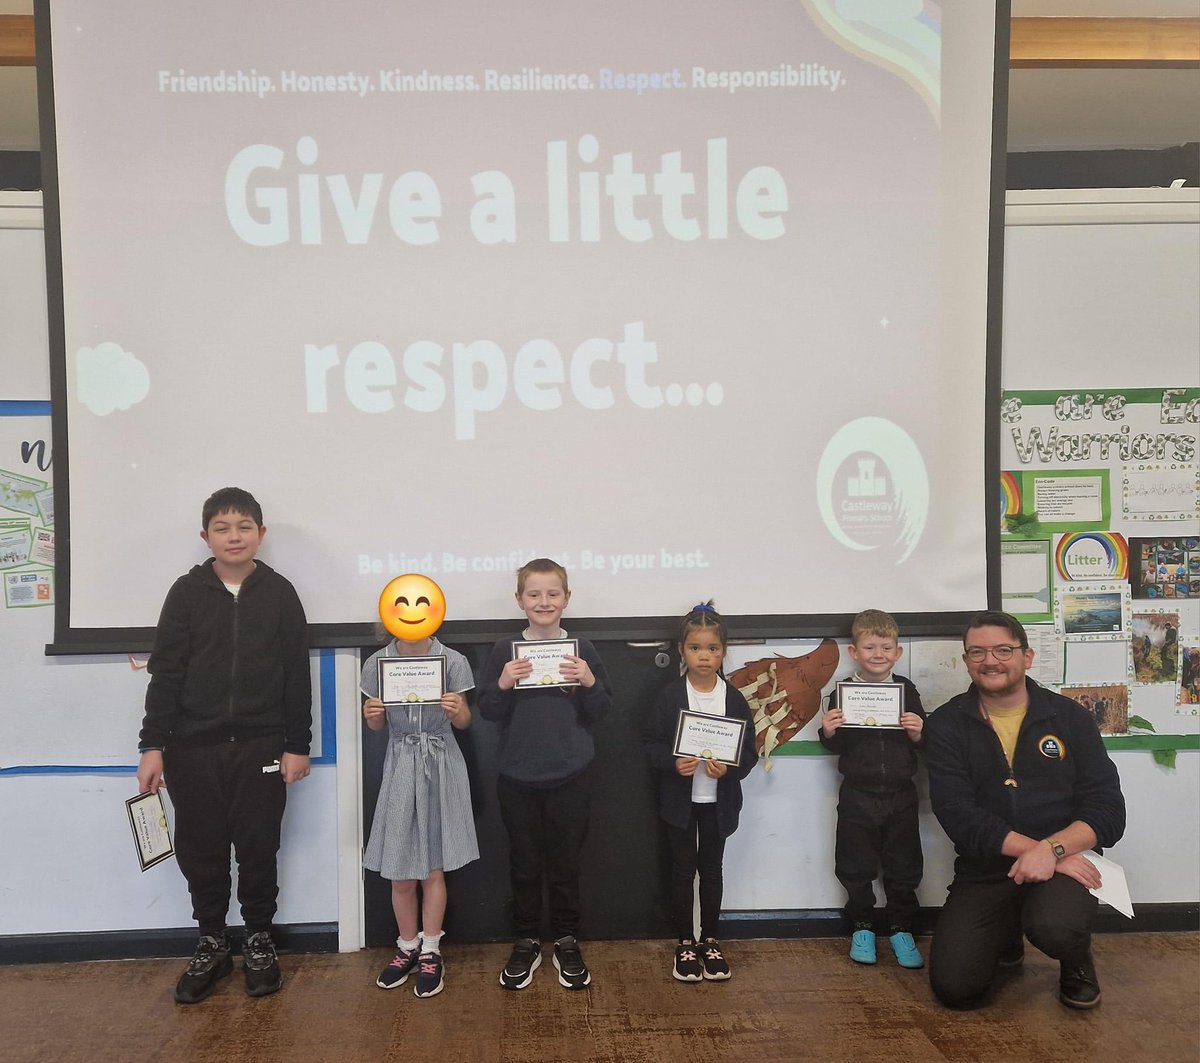 Well done to these wonderful people who do things #TheCastleWAY and always show respect to their environment, friends, teachers and to themselves! #BeYourBest #WeAreCastleway